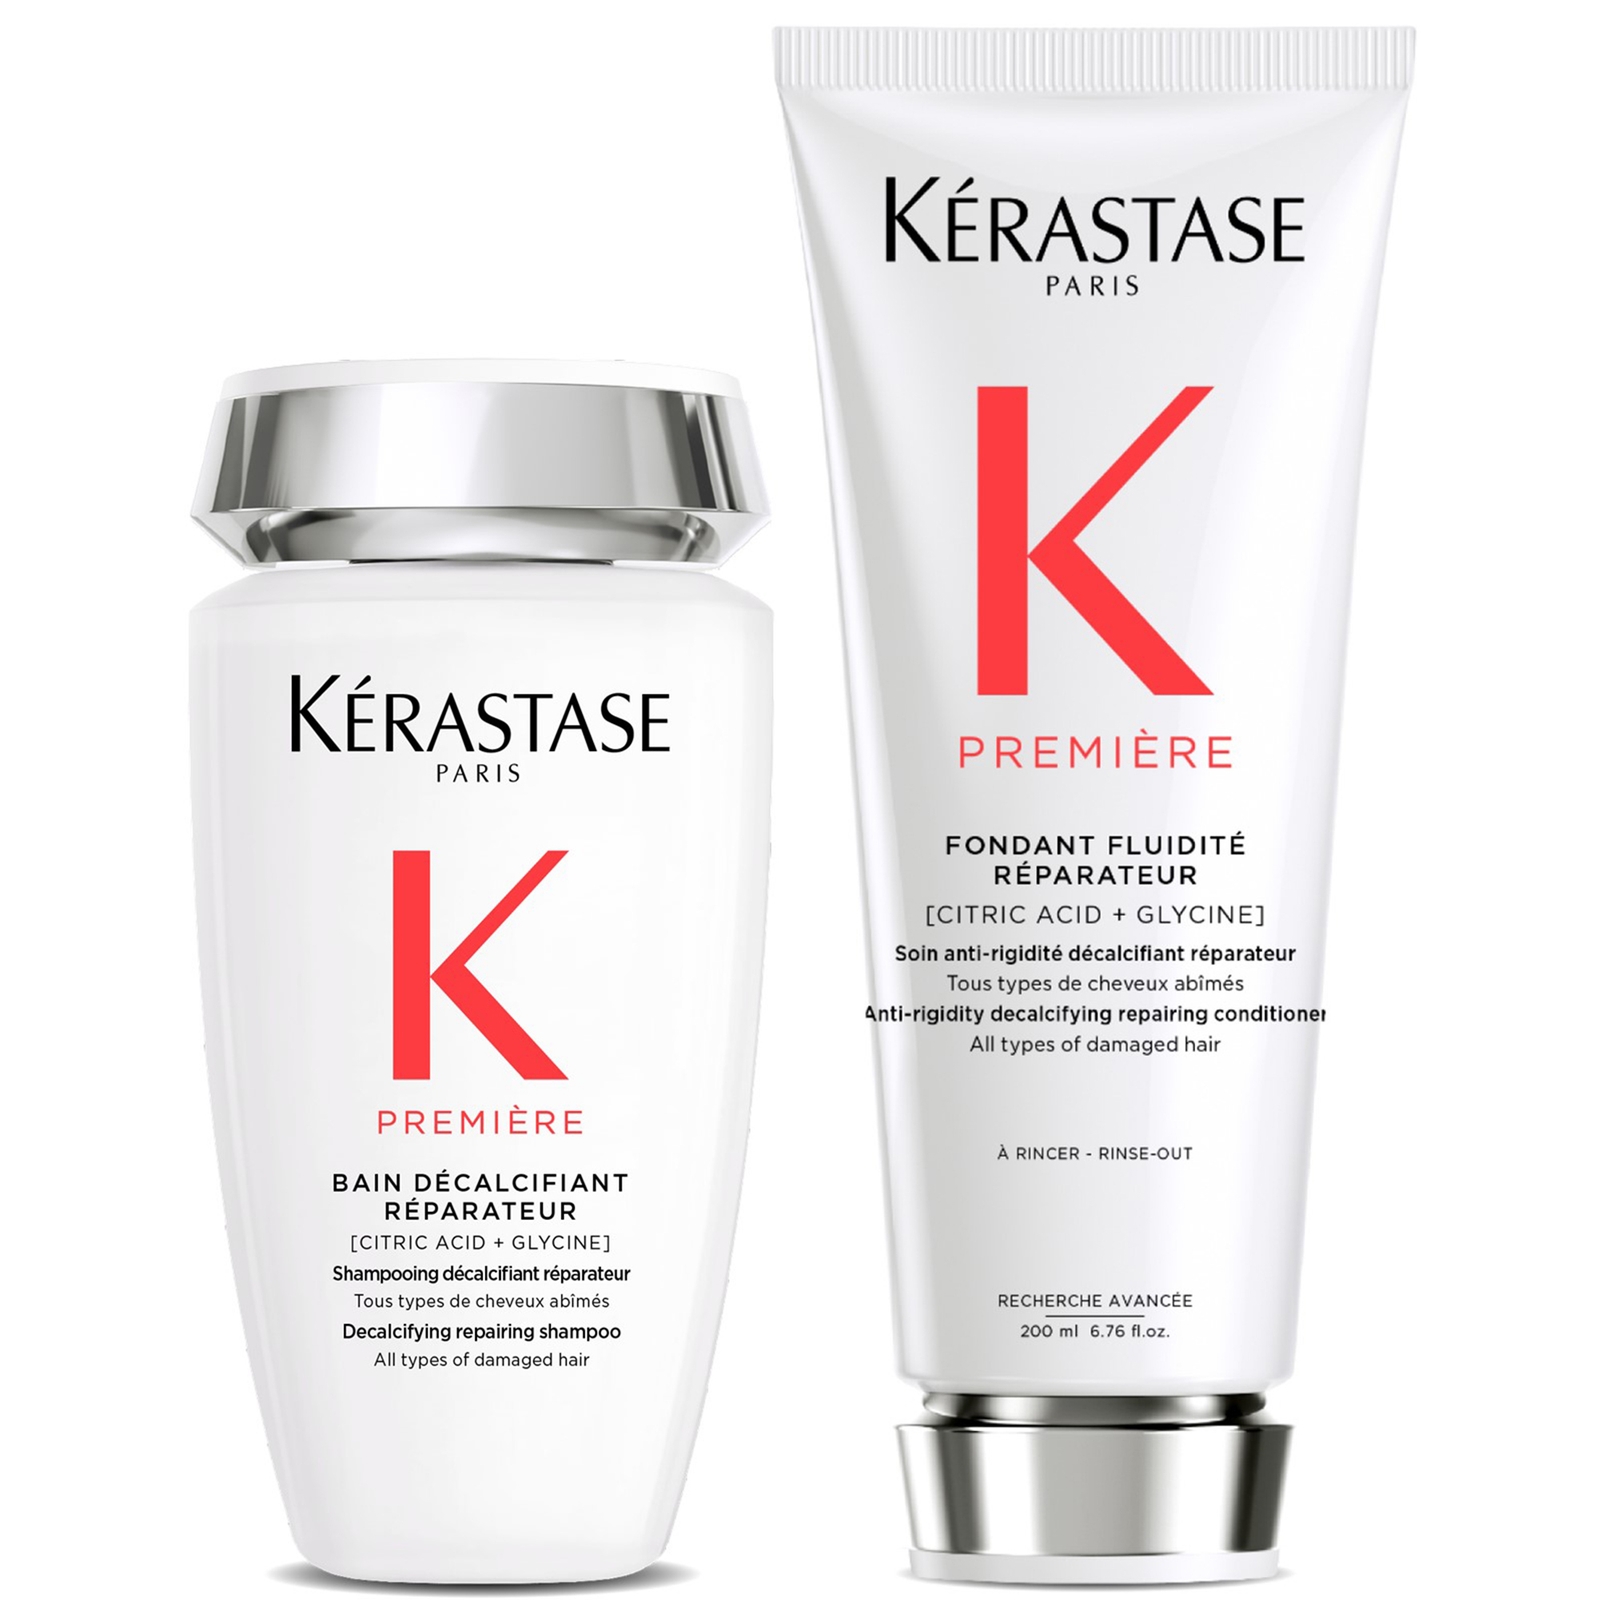 Kerastase Premiere Decalcifying Repairing Shampoo and Conditioner Duo for Damaged Hair with Pure Cit